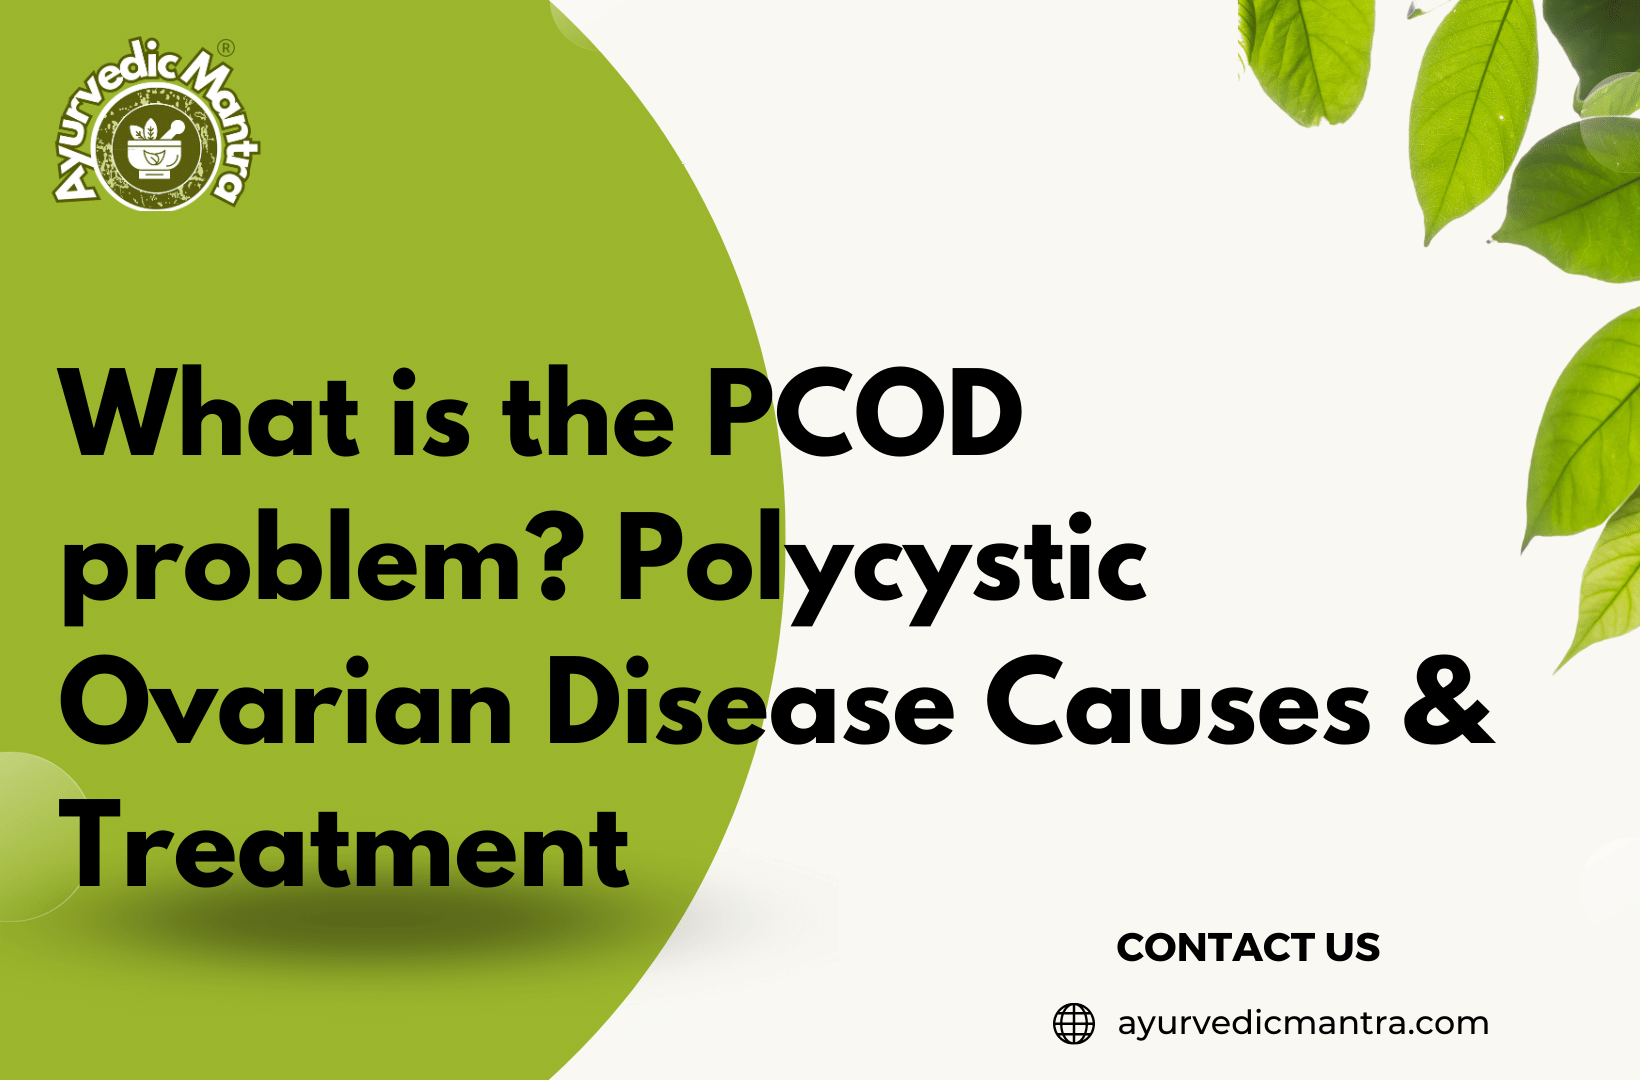 What is the PCOD problem Polycystic Ovarian Disease Causes & Treatment